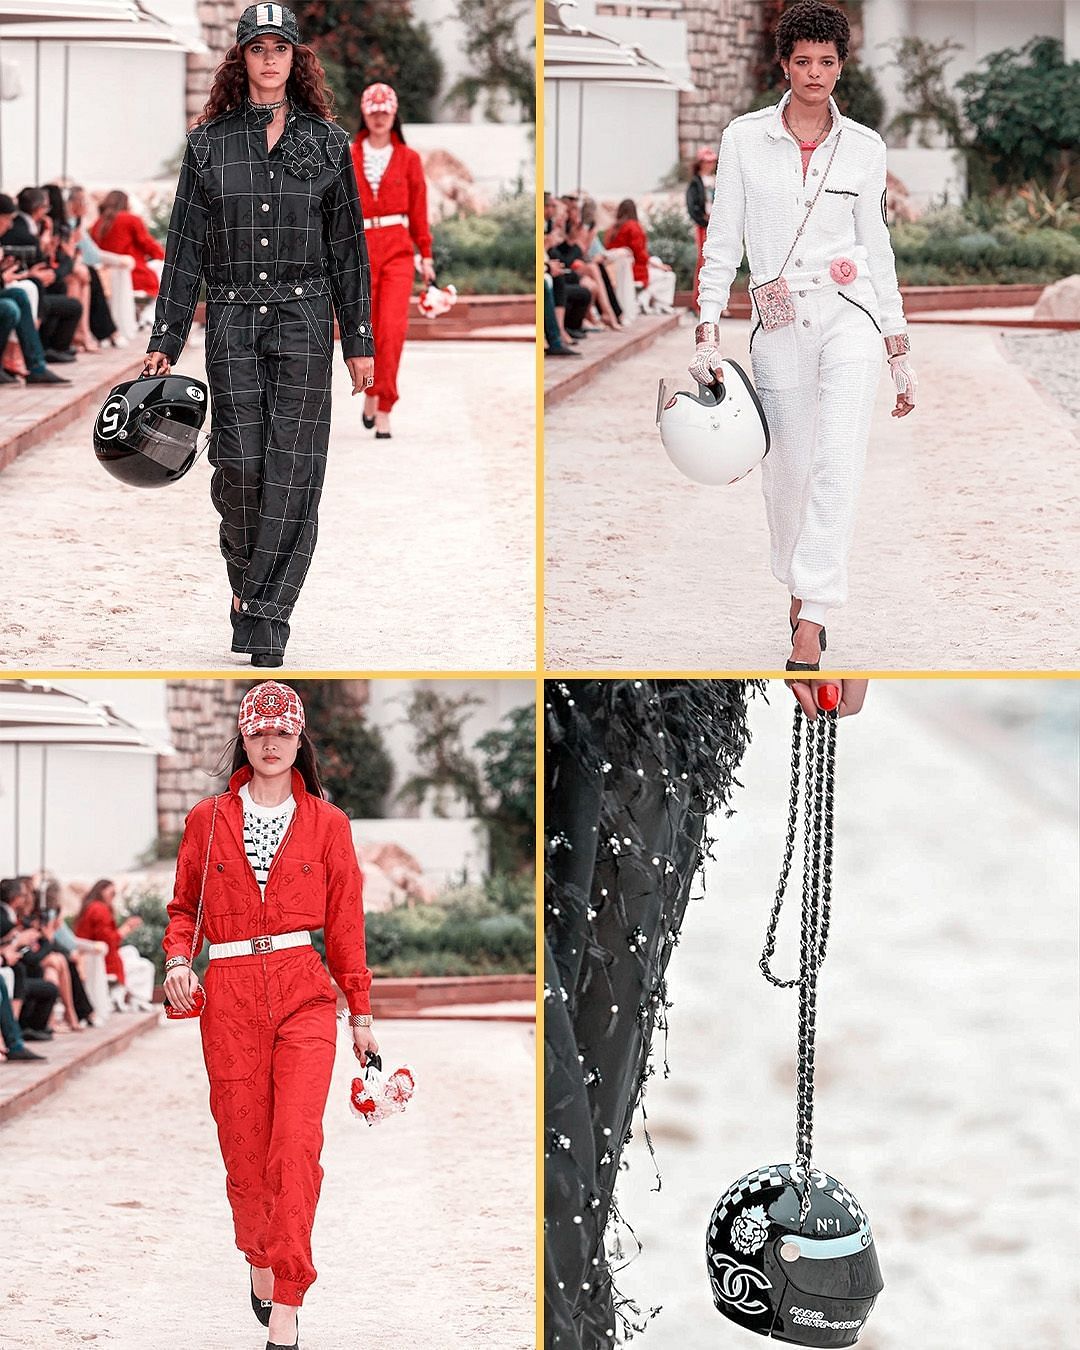 Glimpses of Chanel